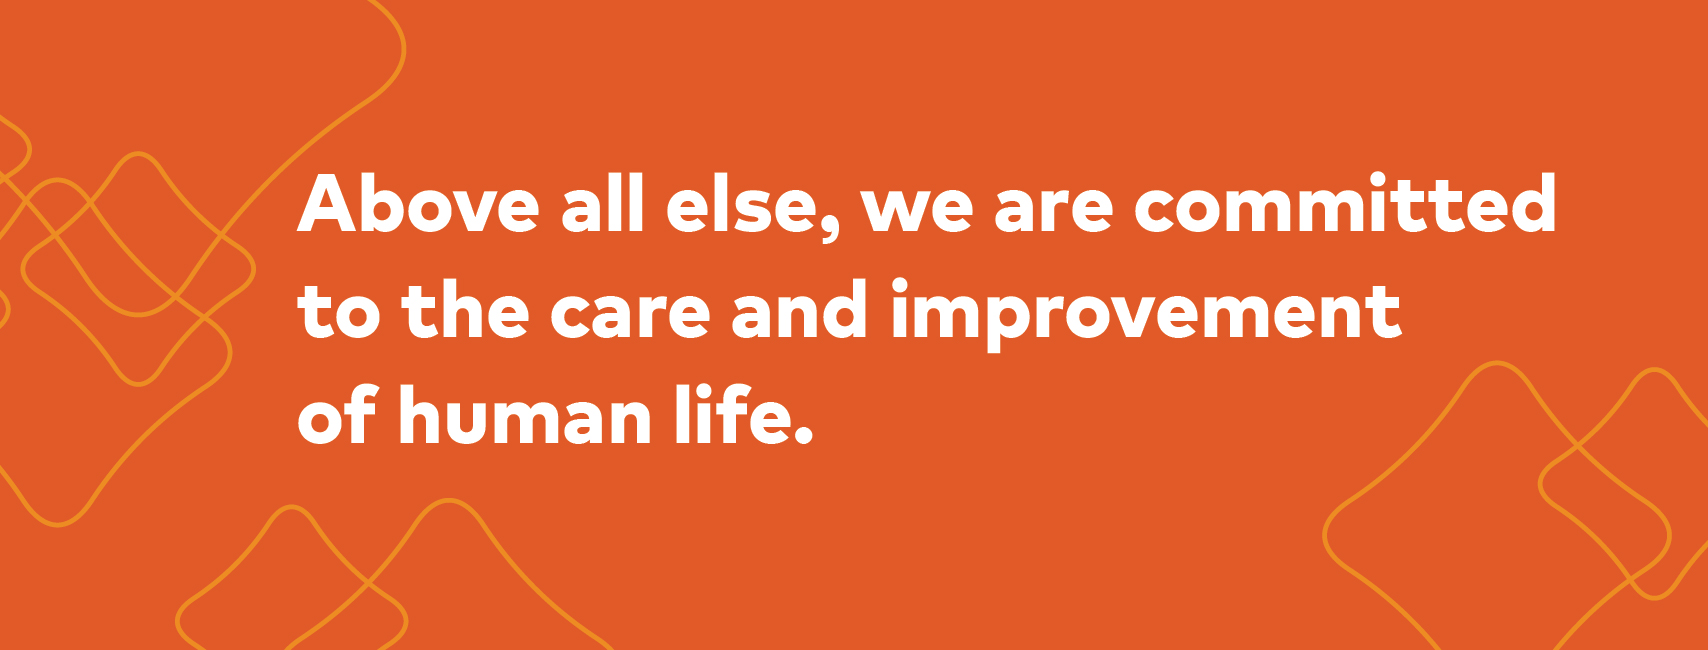 An image that says Above all else, we are committed to the care and improvement of human life